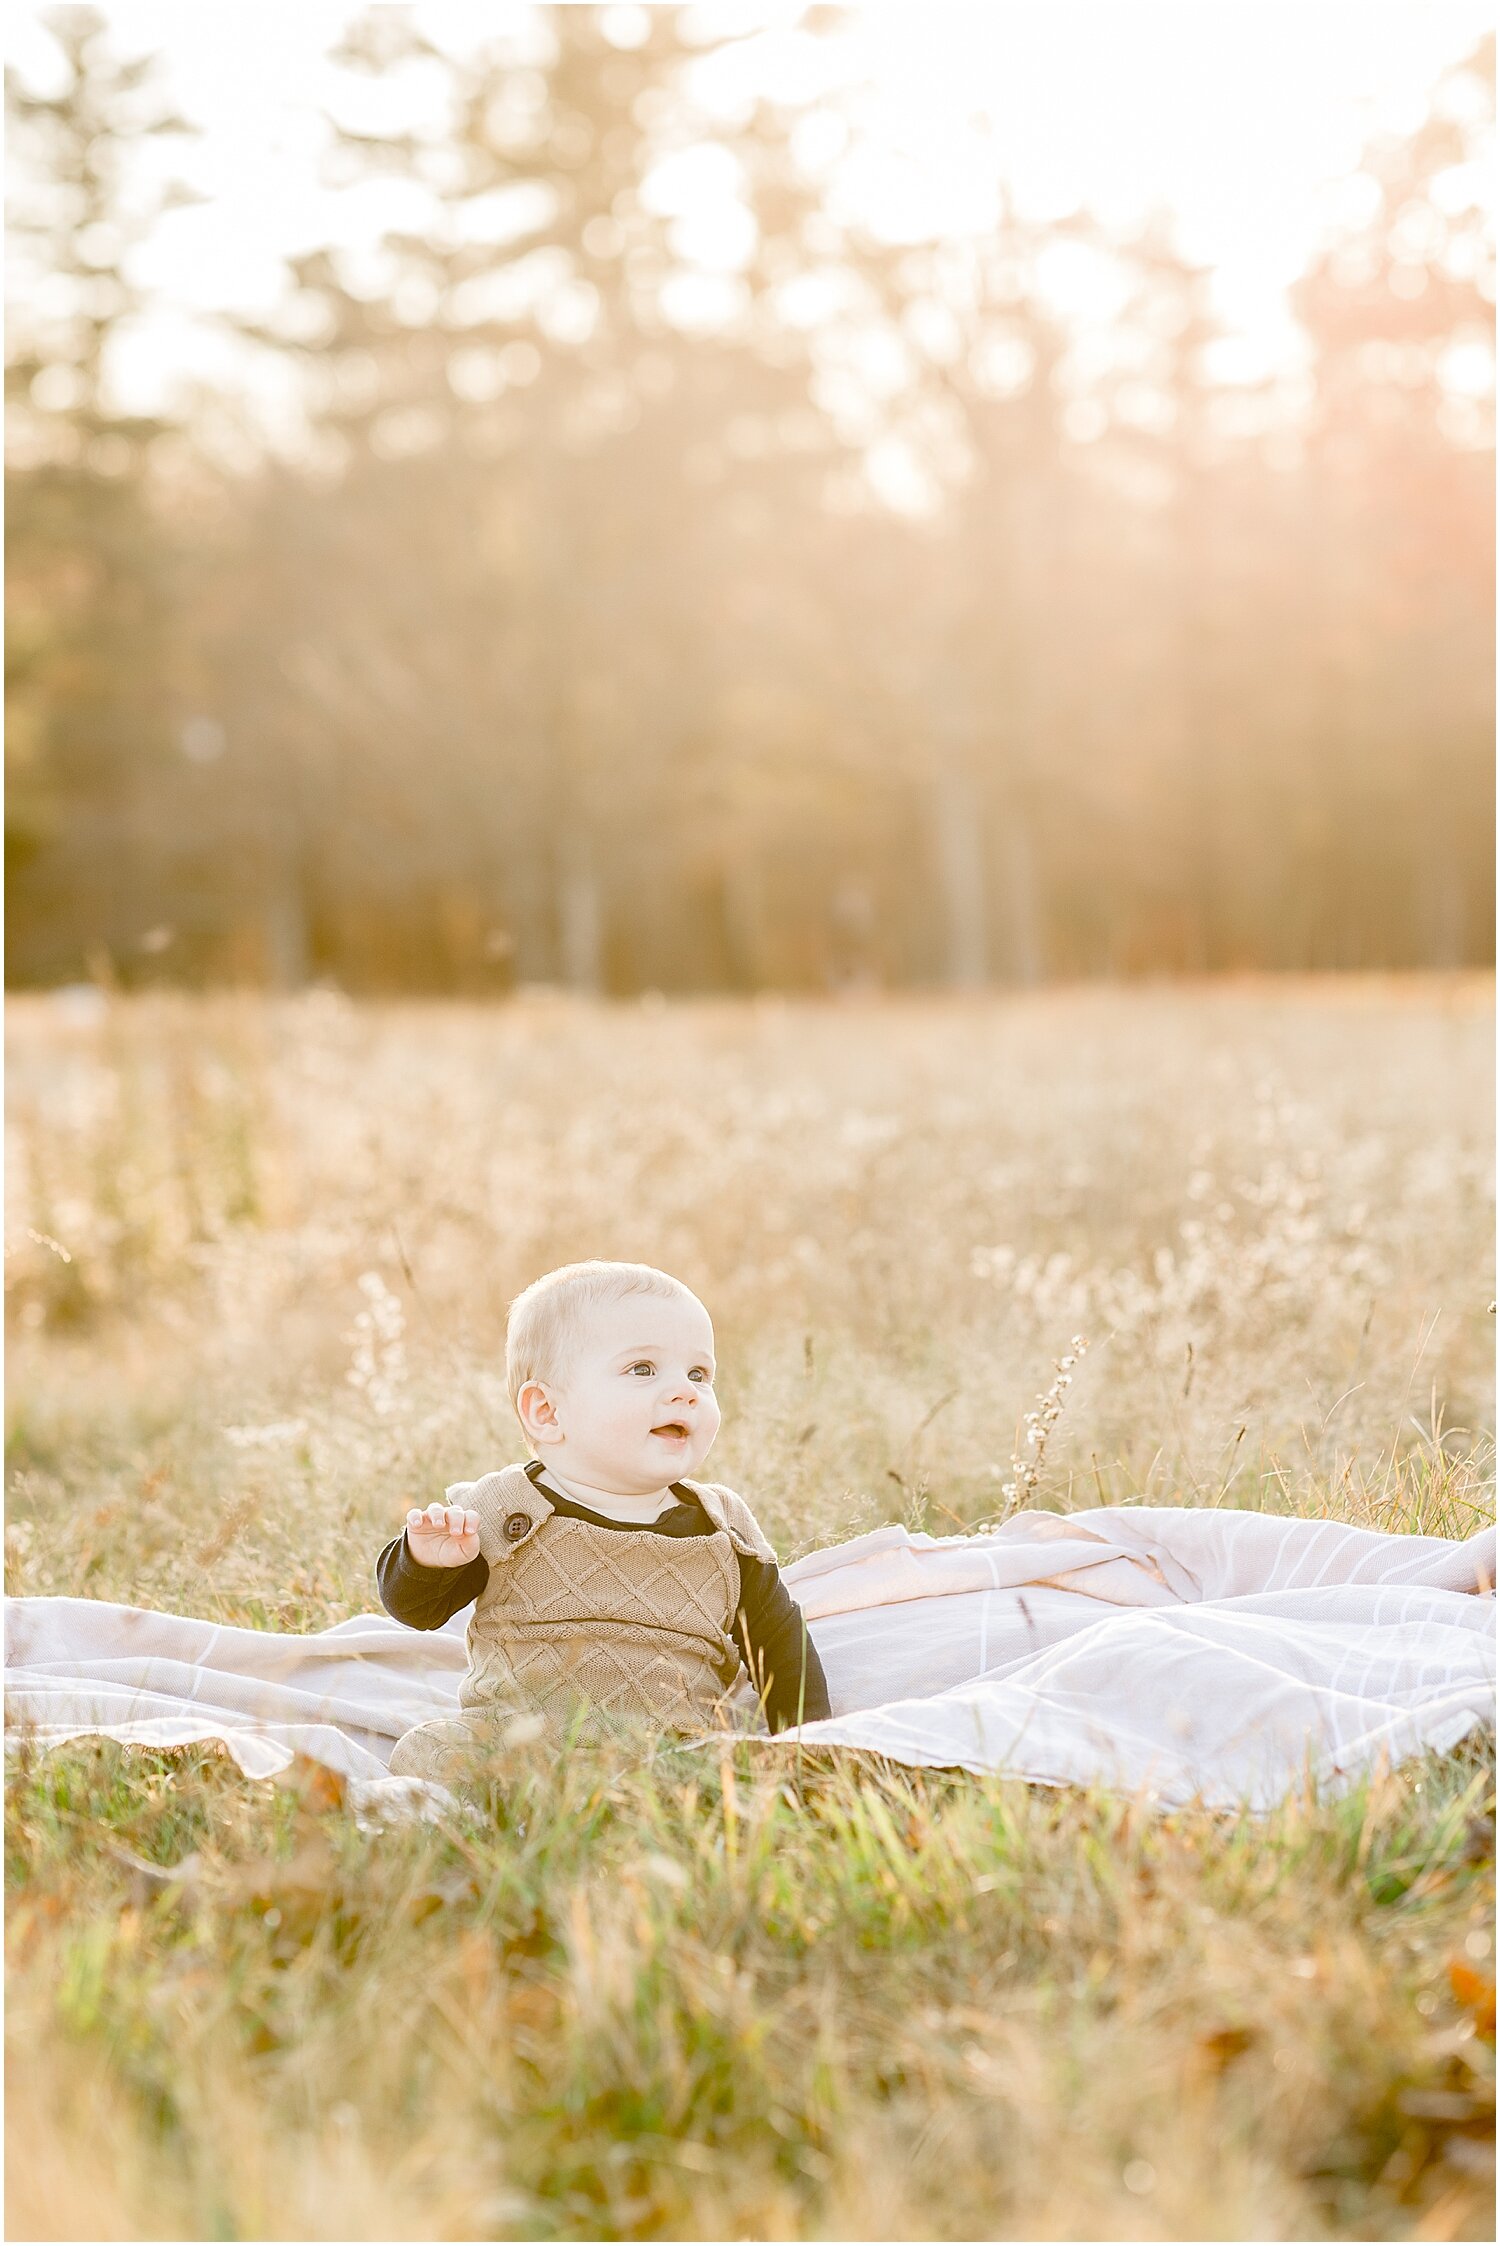 Sitter Milestone Session at Waveny Park in New Canaan, CT. Photos by Kristin Wood Photography.